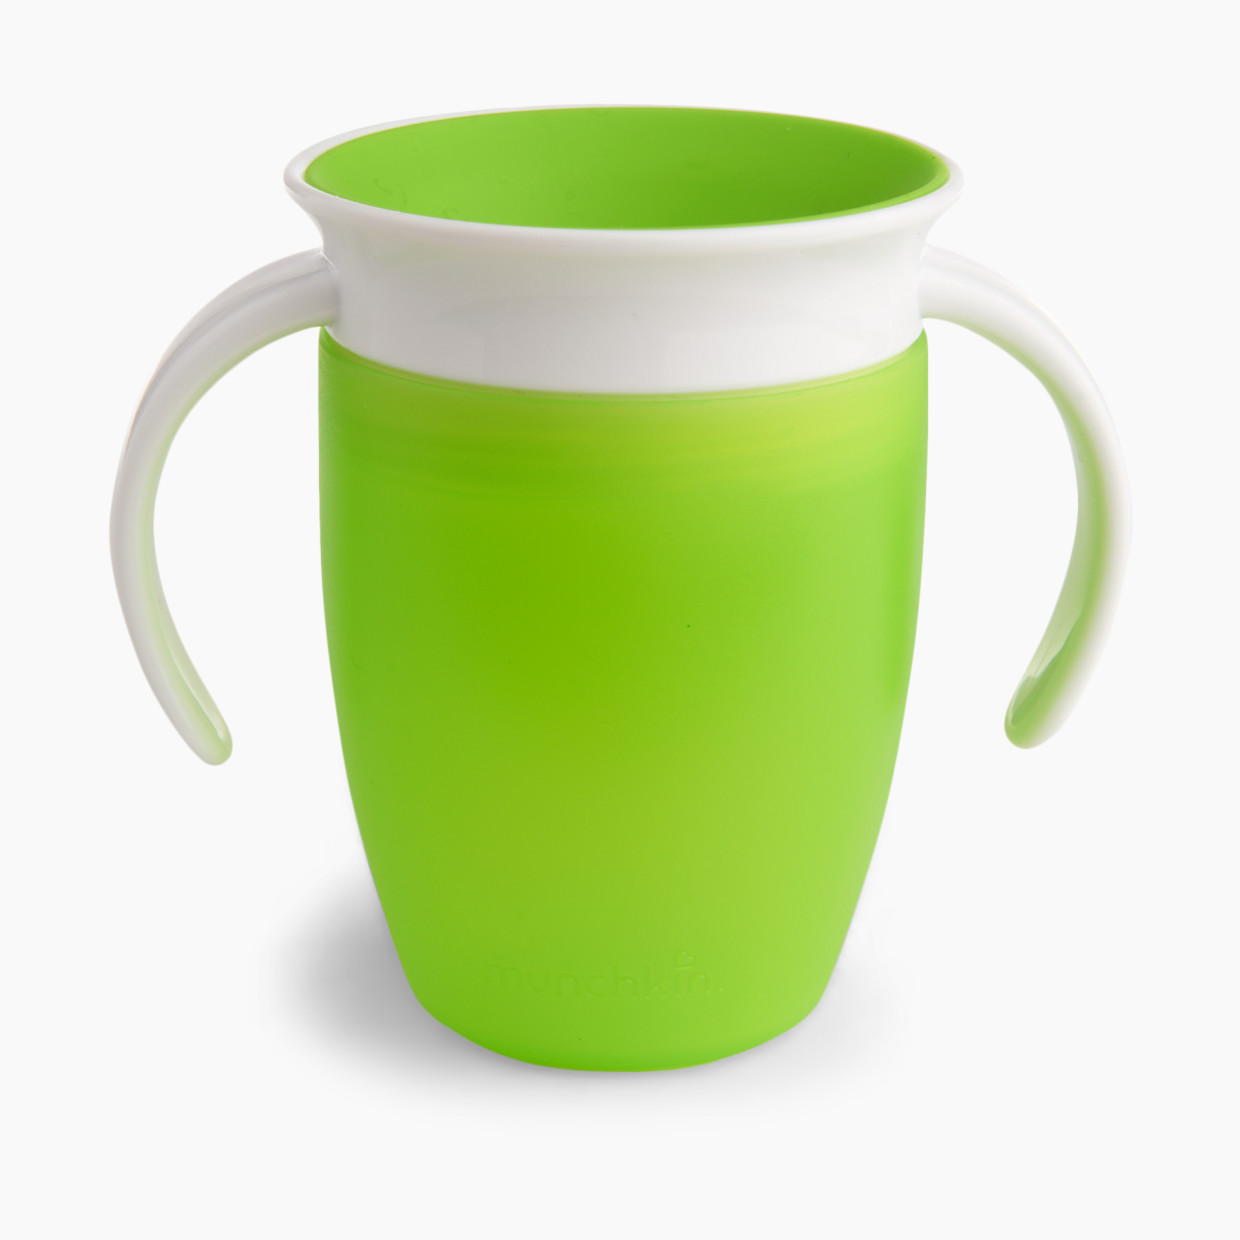 Munchkin Miracle 360 Trainer Cup - Green, 1.